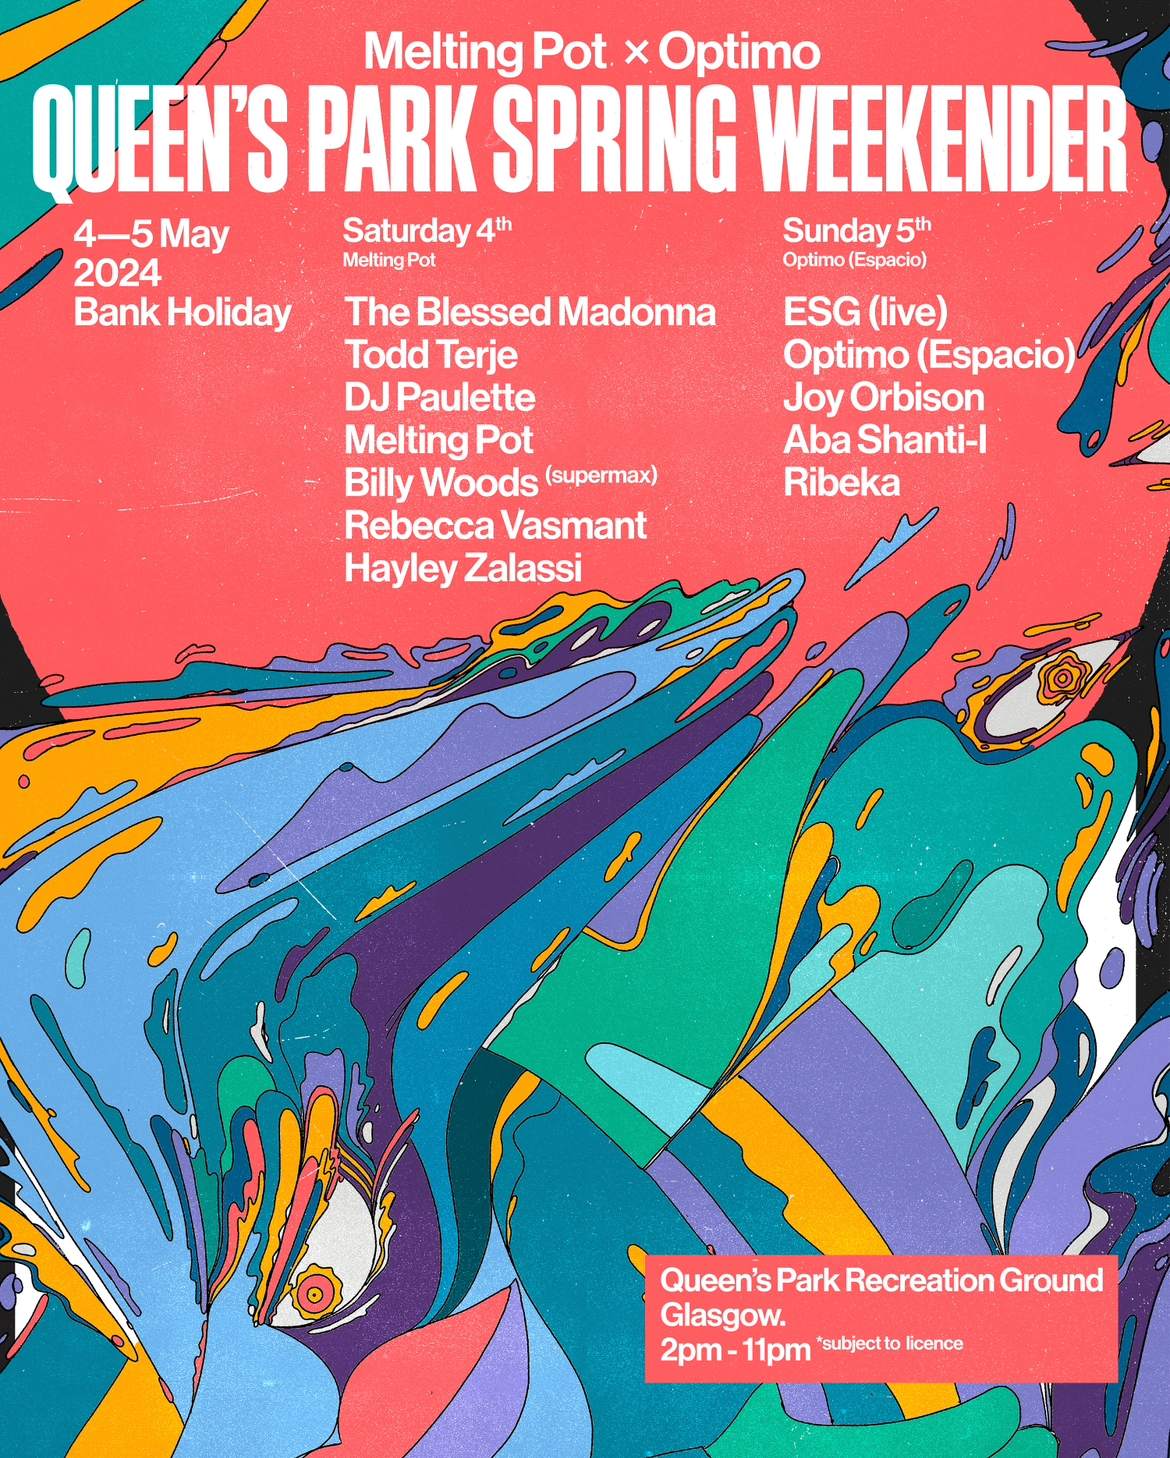 Queen’s Park Spring Weekender ’24 by Melting Pot & Optimo // Sat 4th & Sun 5th of May